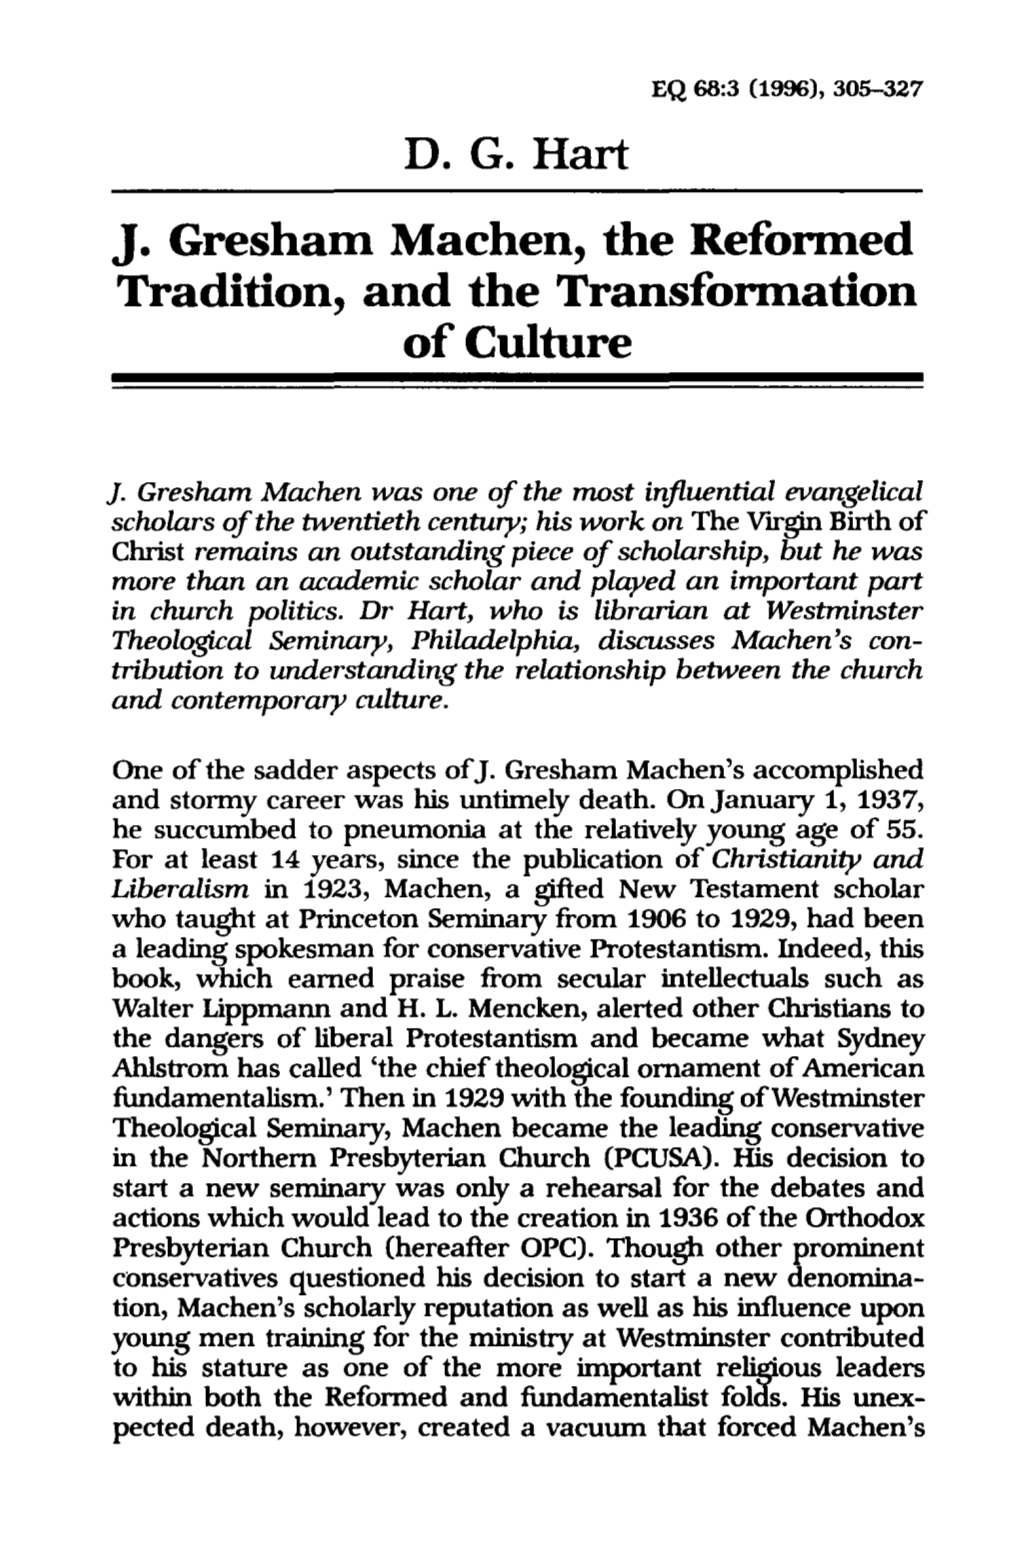 "J. Gresham Machen, the Reformed Tradition, and the Transformation Of